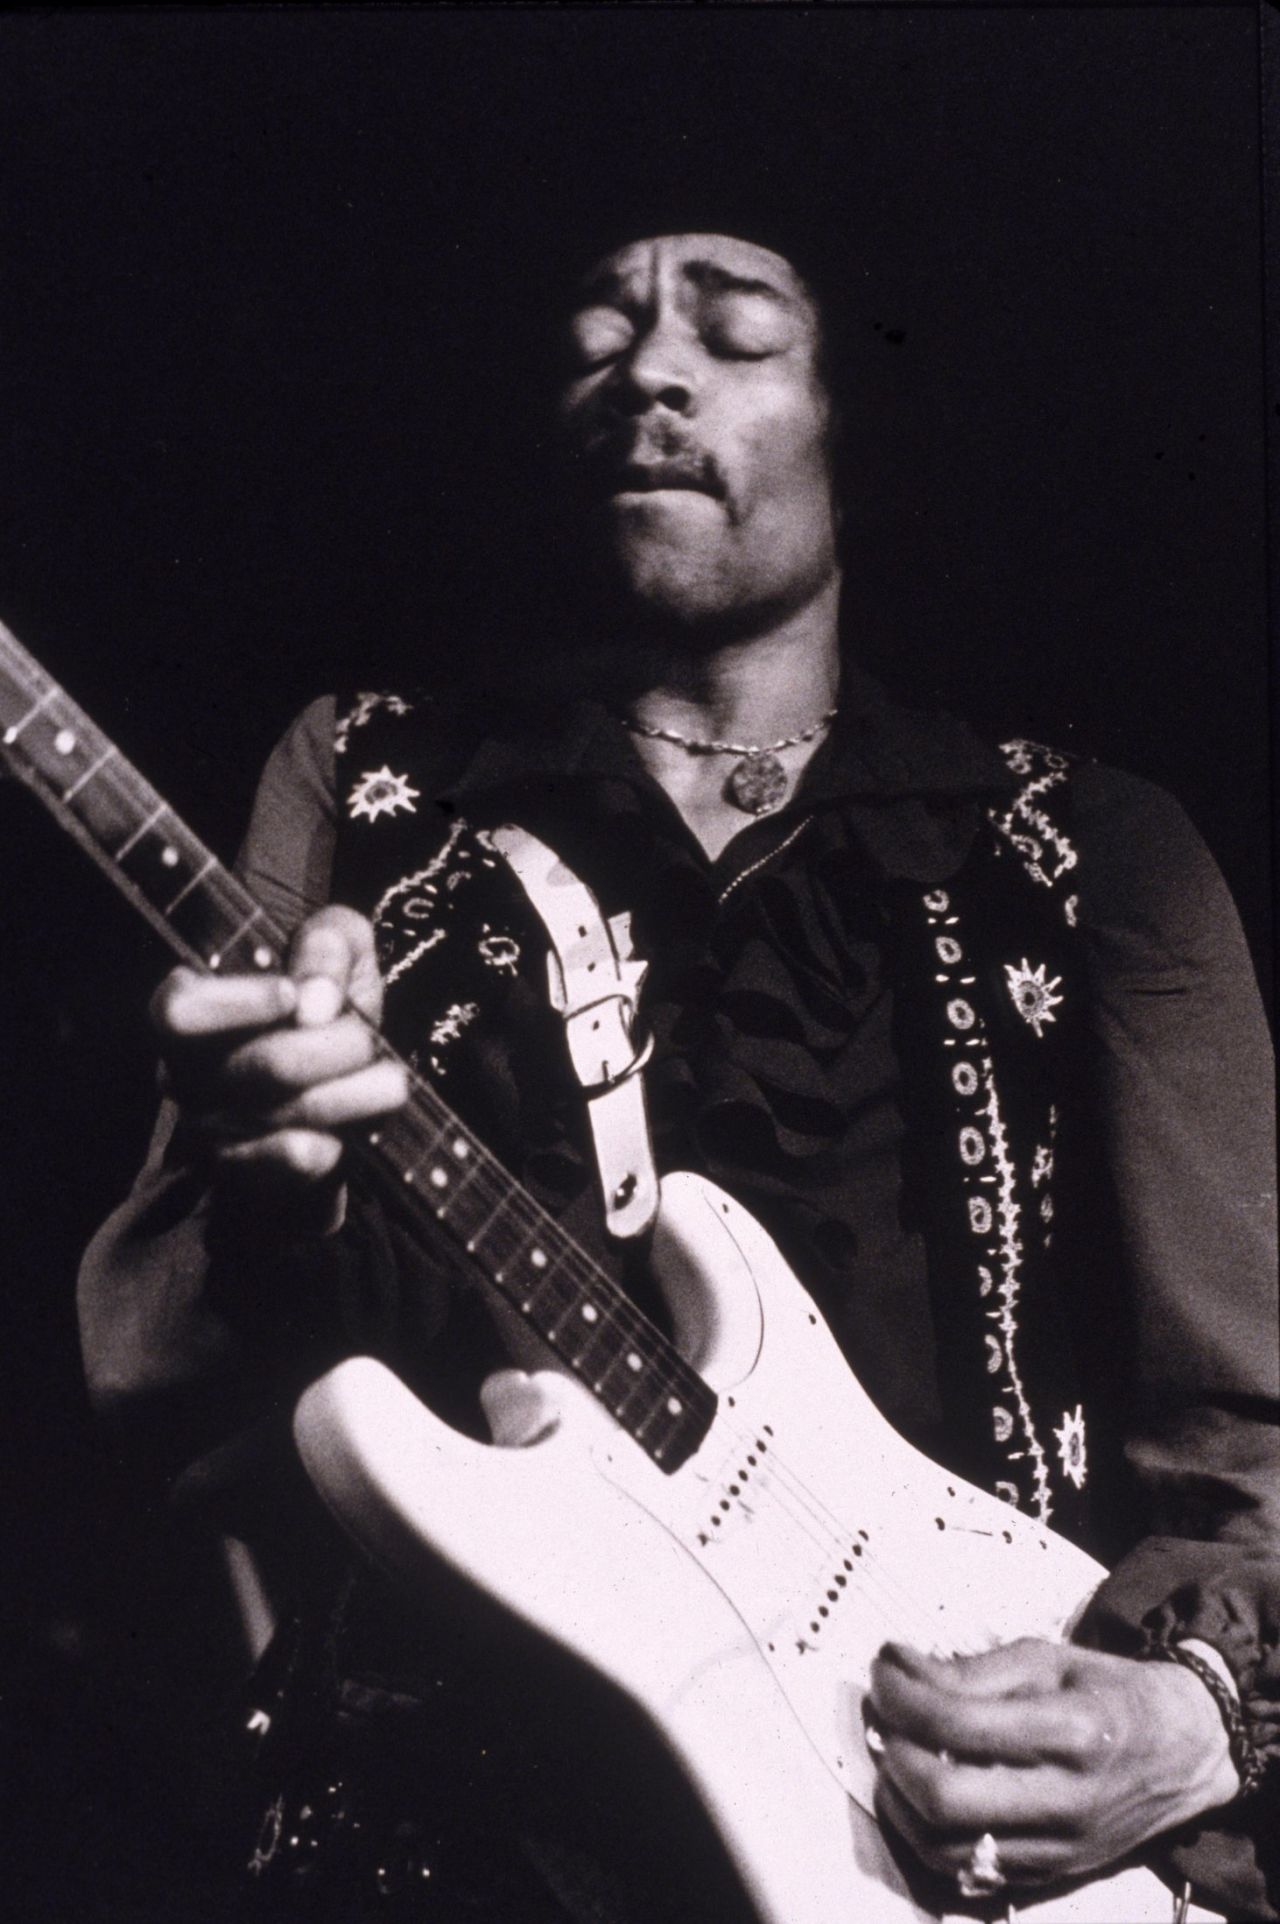 He wasn't just African-American; Hendrix also had Native American ancestors. He would pay homage to his Native American roots with songs such as "I Don't Live Today" and wore a Native American-inspired outfit at Woodstock.